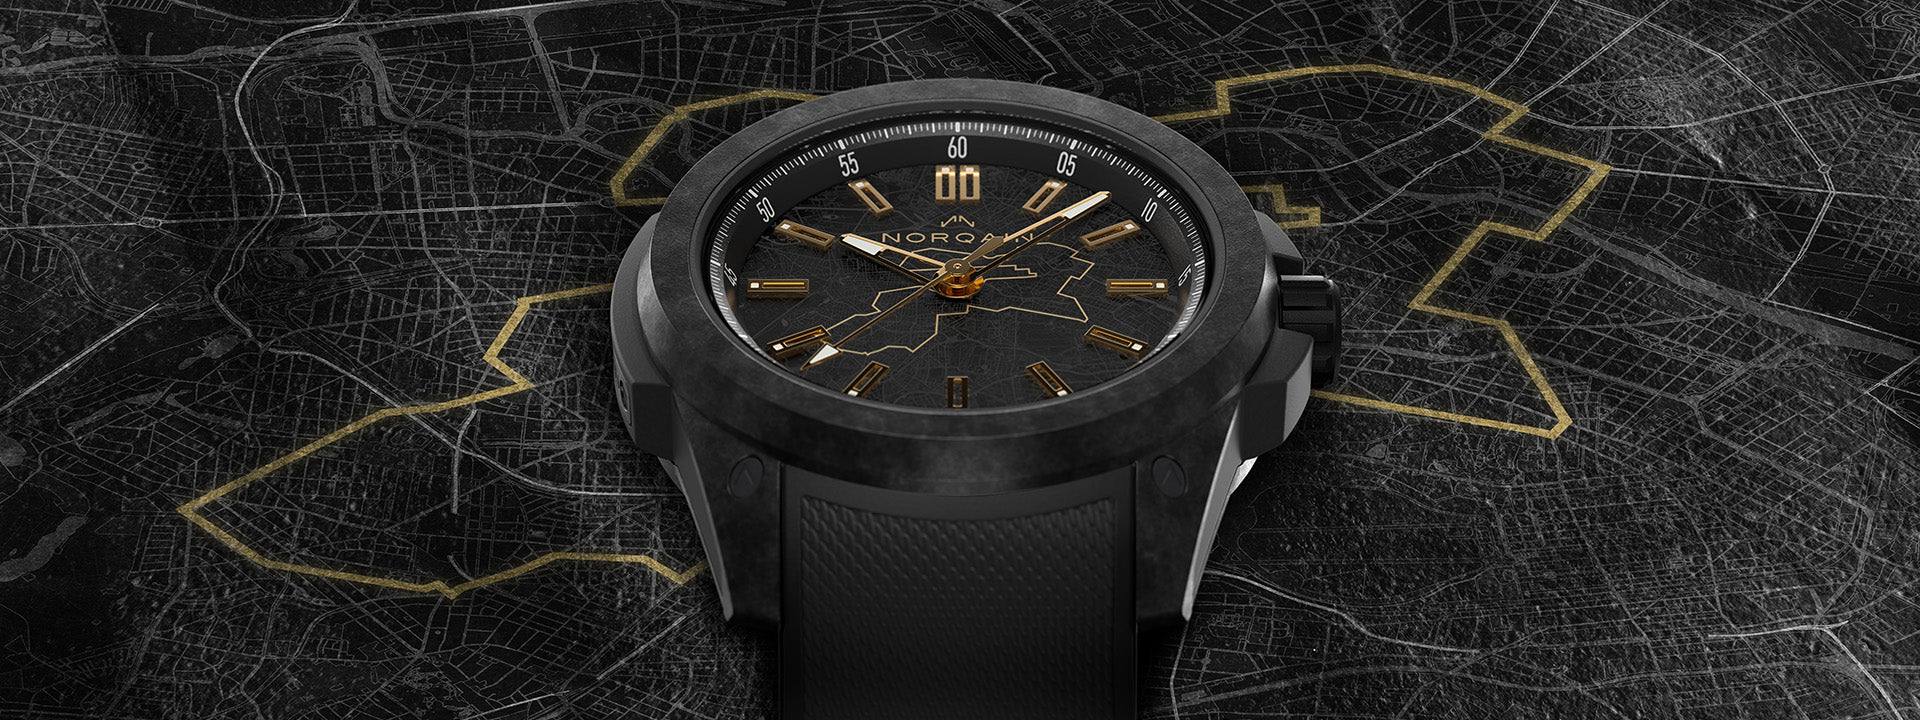 NORQAIN returns as the Official Timekeeper of the BMW BERLIN-MARATHON and celebrates the race’s 50th anniversary with a limited-edition Wild ONE